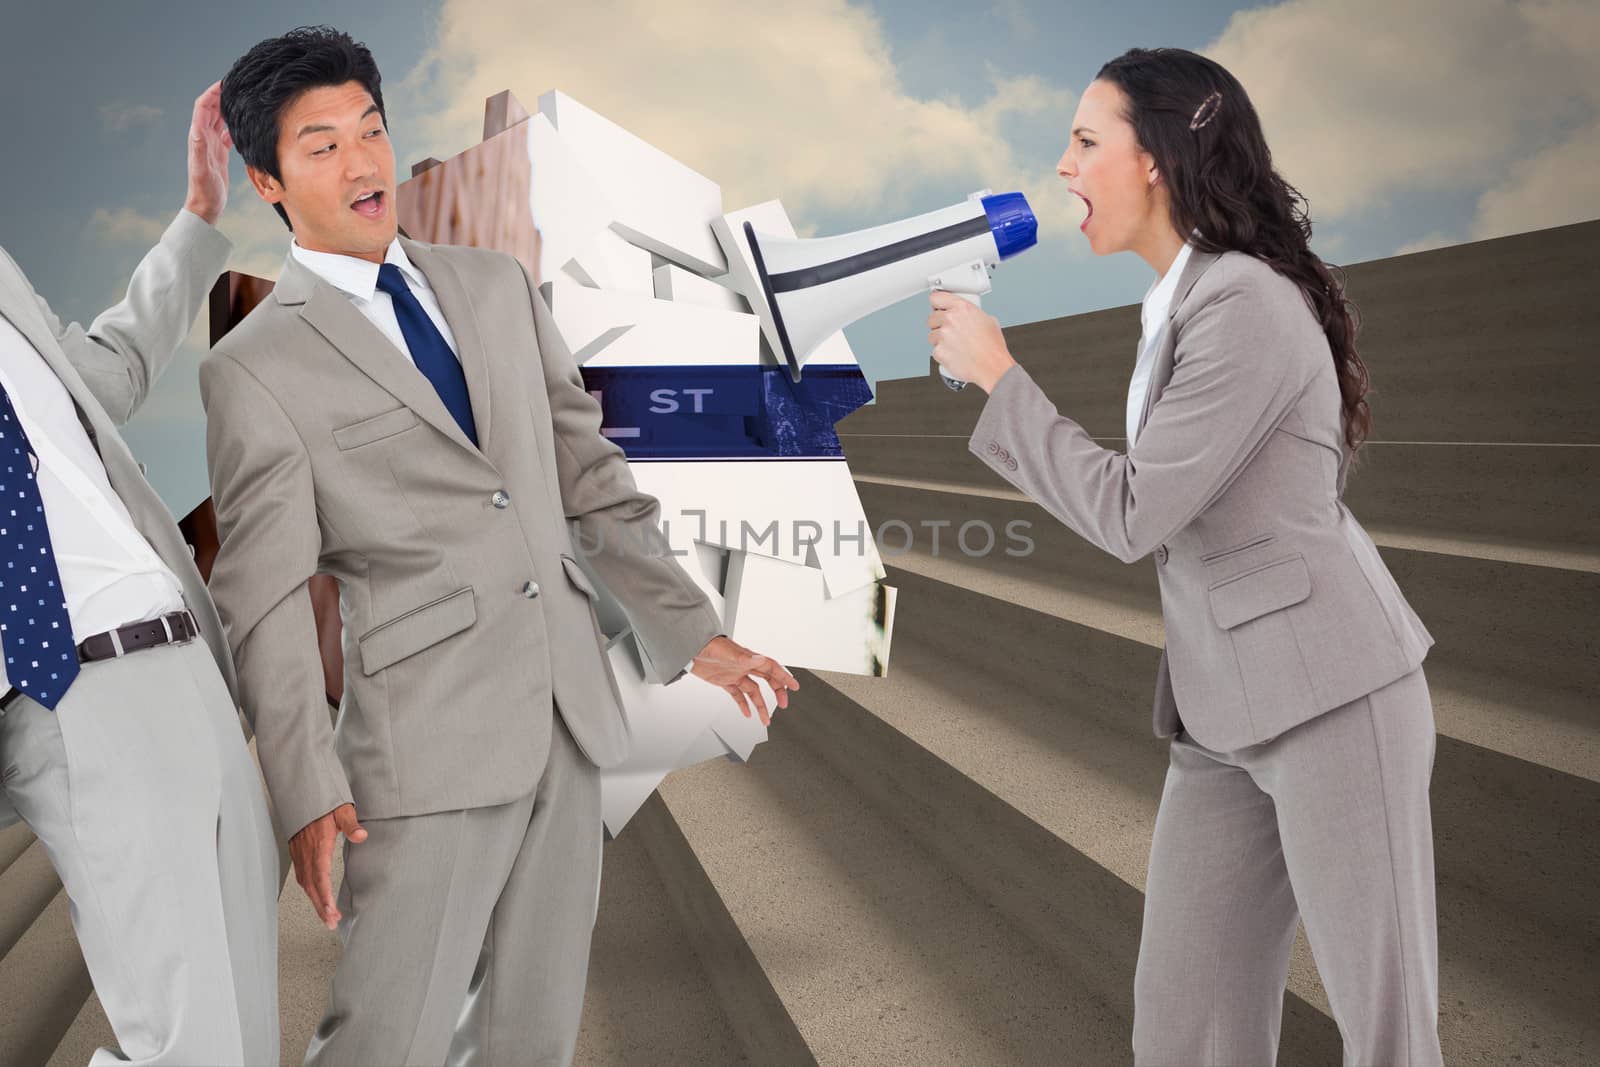 Businesswoman with megaphone yelling at colleagues against steps against blue sky